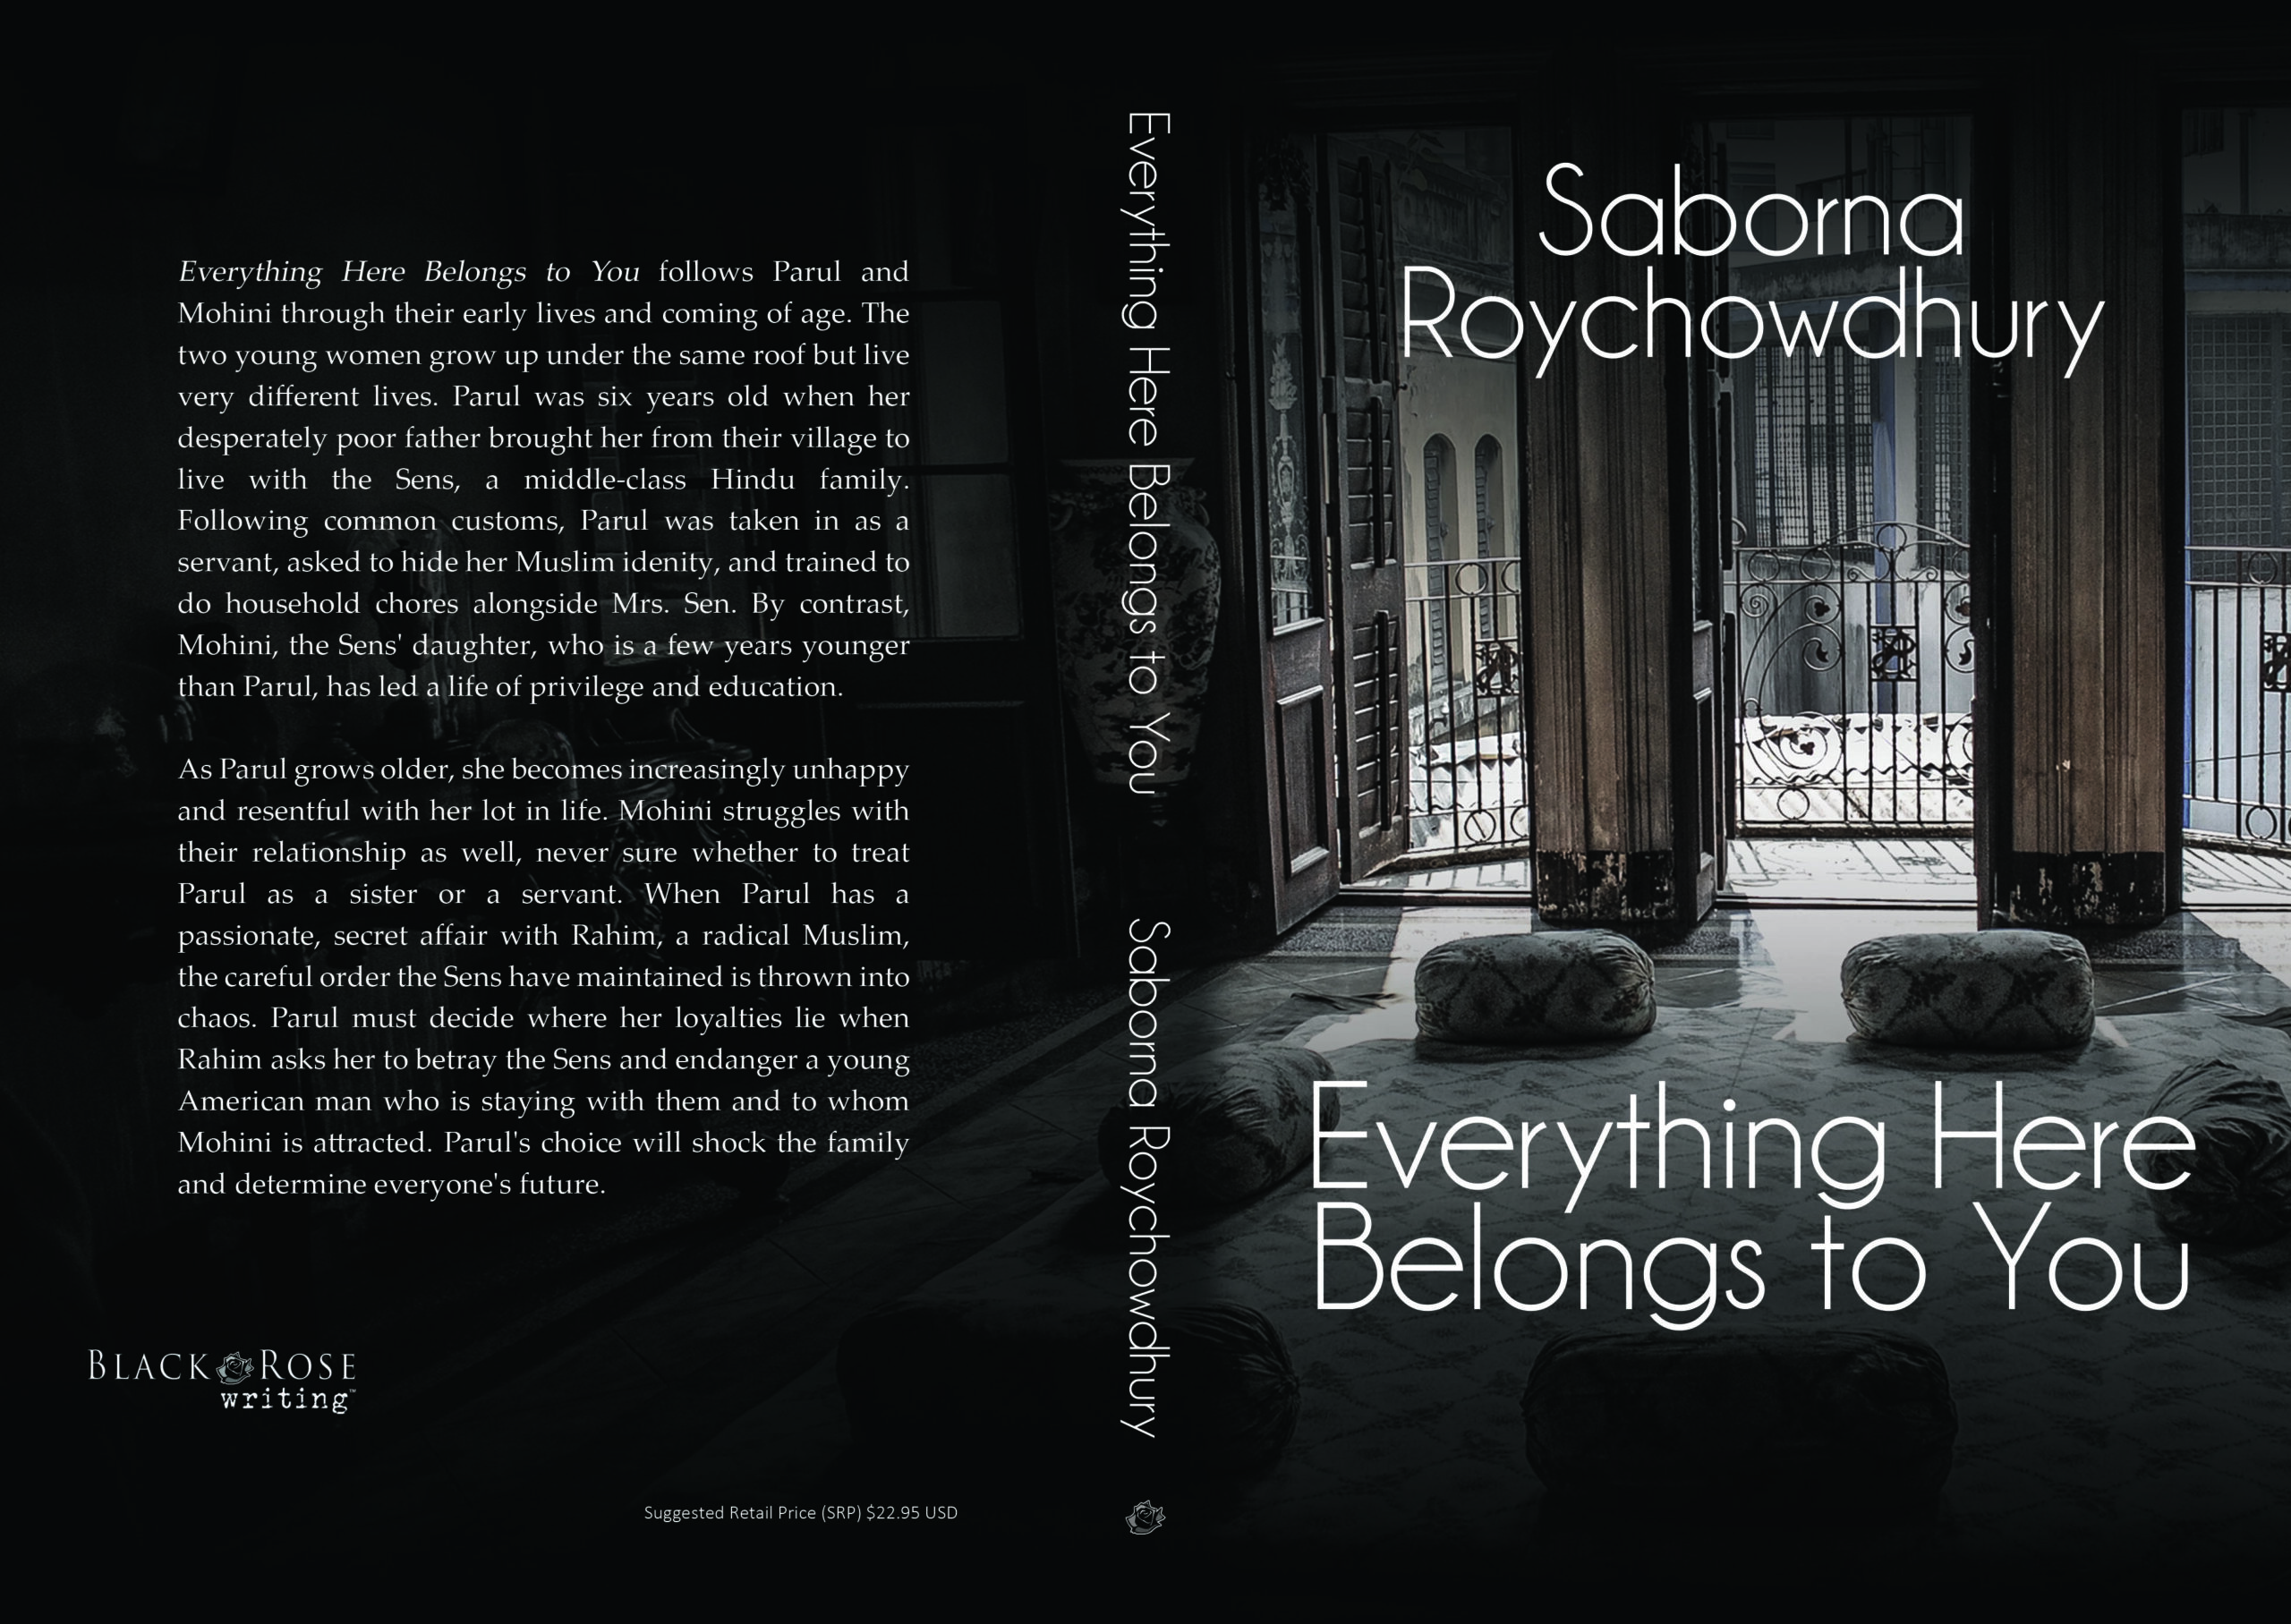 FREE: Everything Here Belongs to You by Saborna Roychowdhury